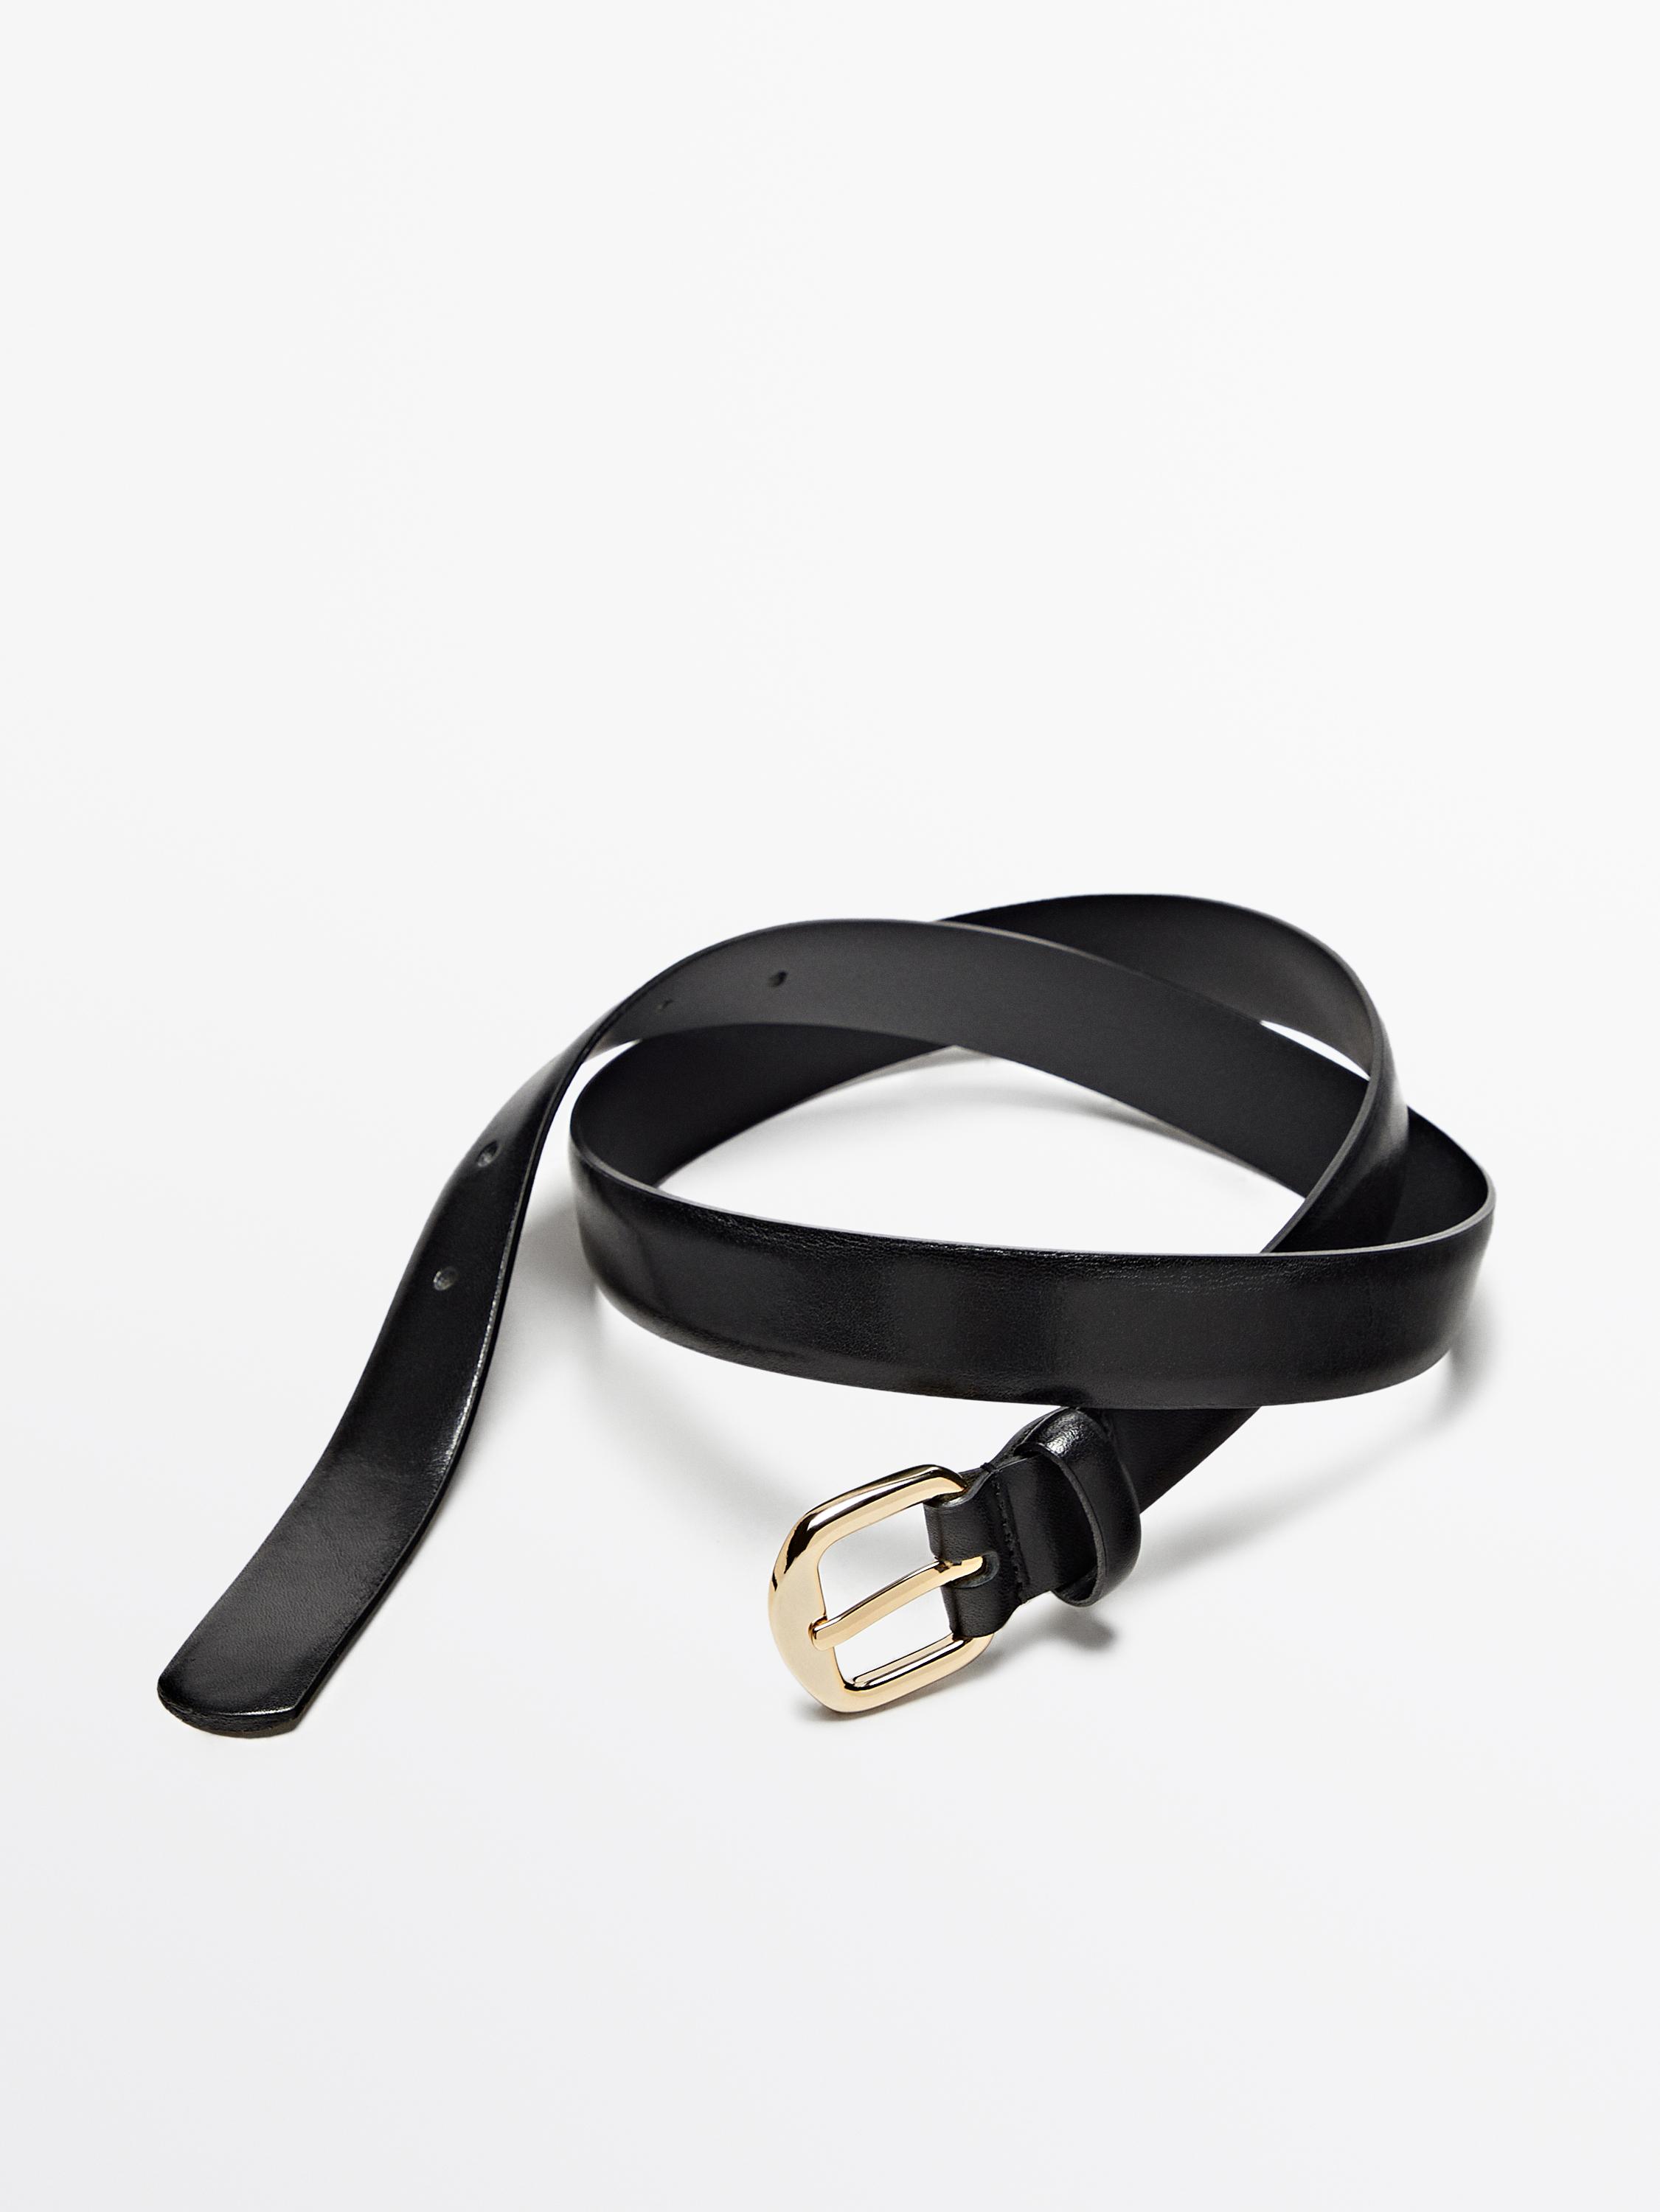 Leather belt with square buckle